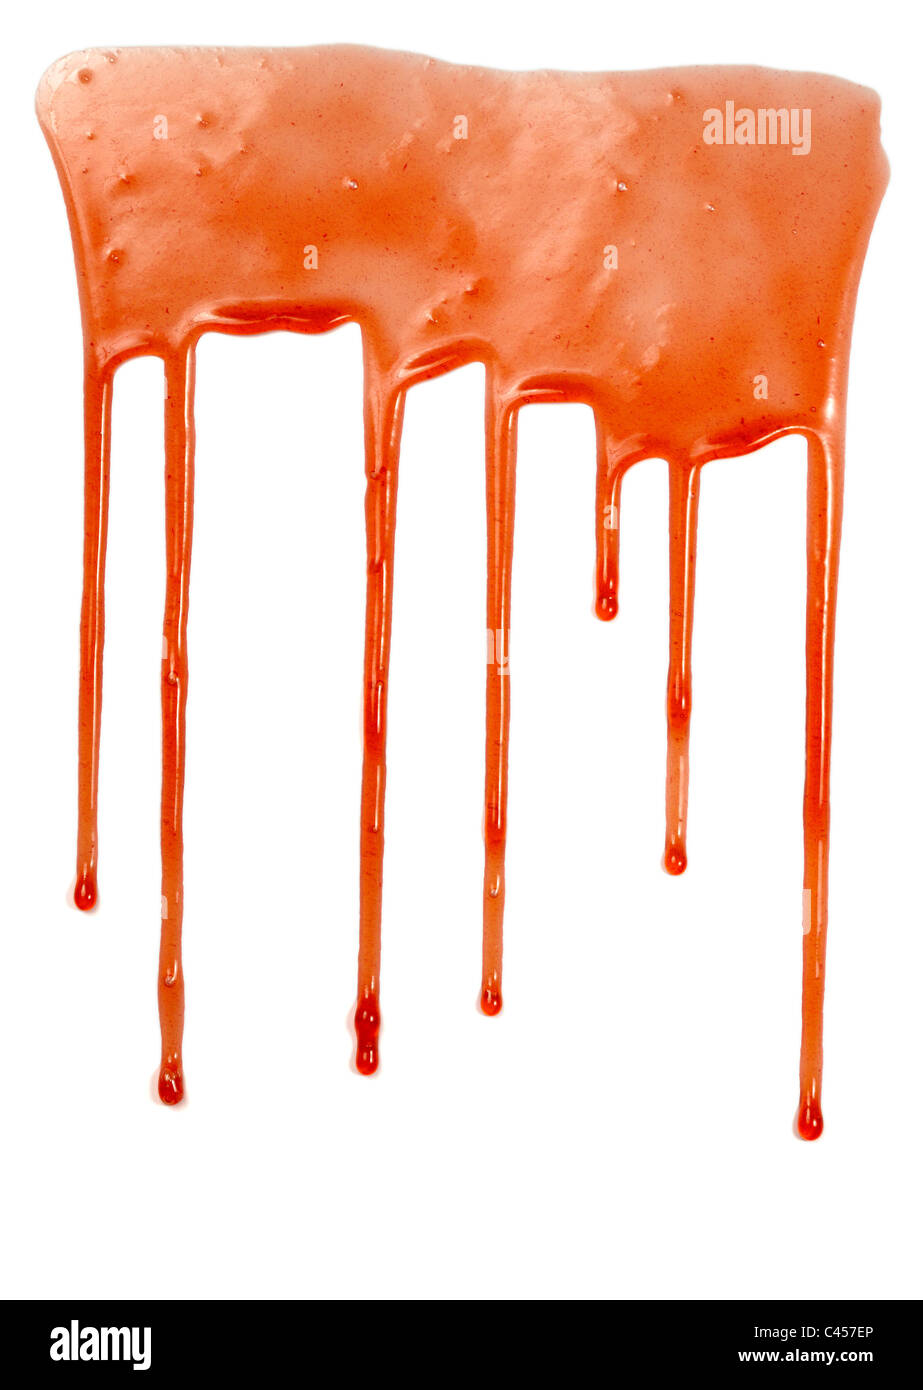 syrup leaking Stock Photo